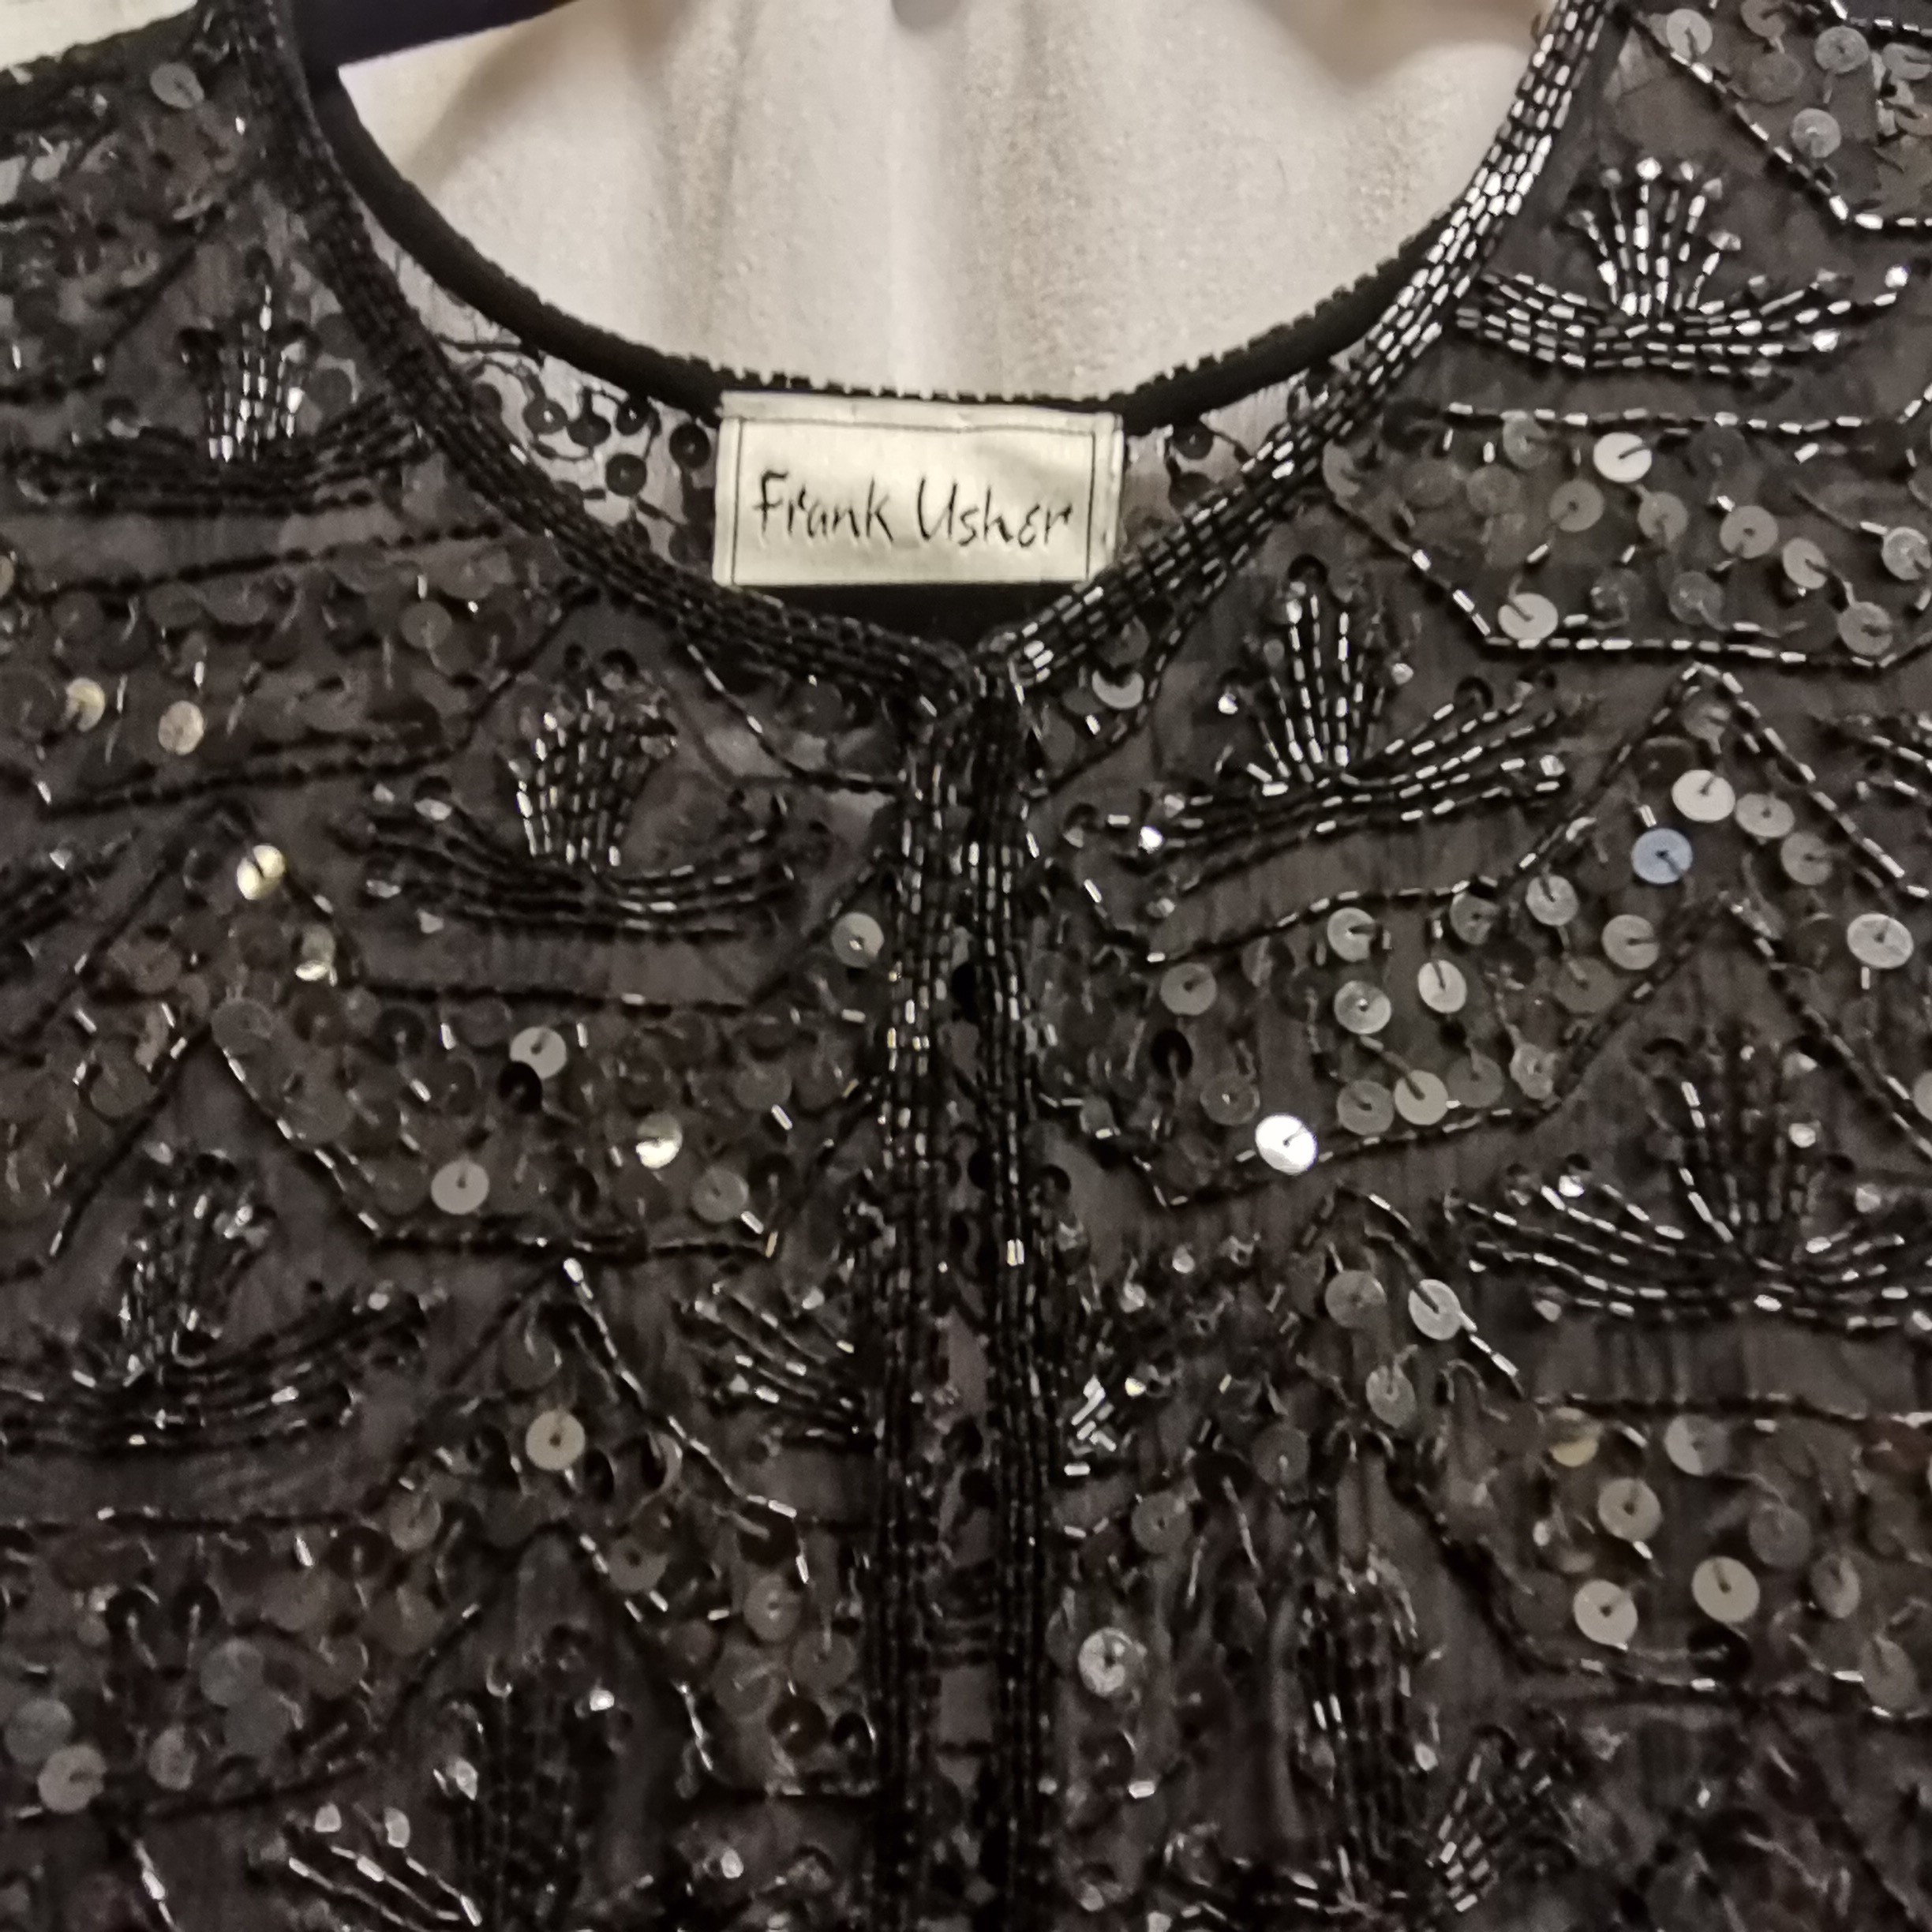 Frank Usher beaded jacket in good condition 92cm bust t/w Gina Bacconi stretch jersey dress 80cm - Image 3 of 3